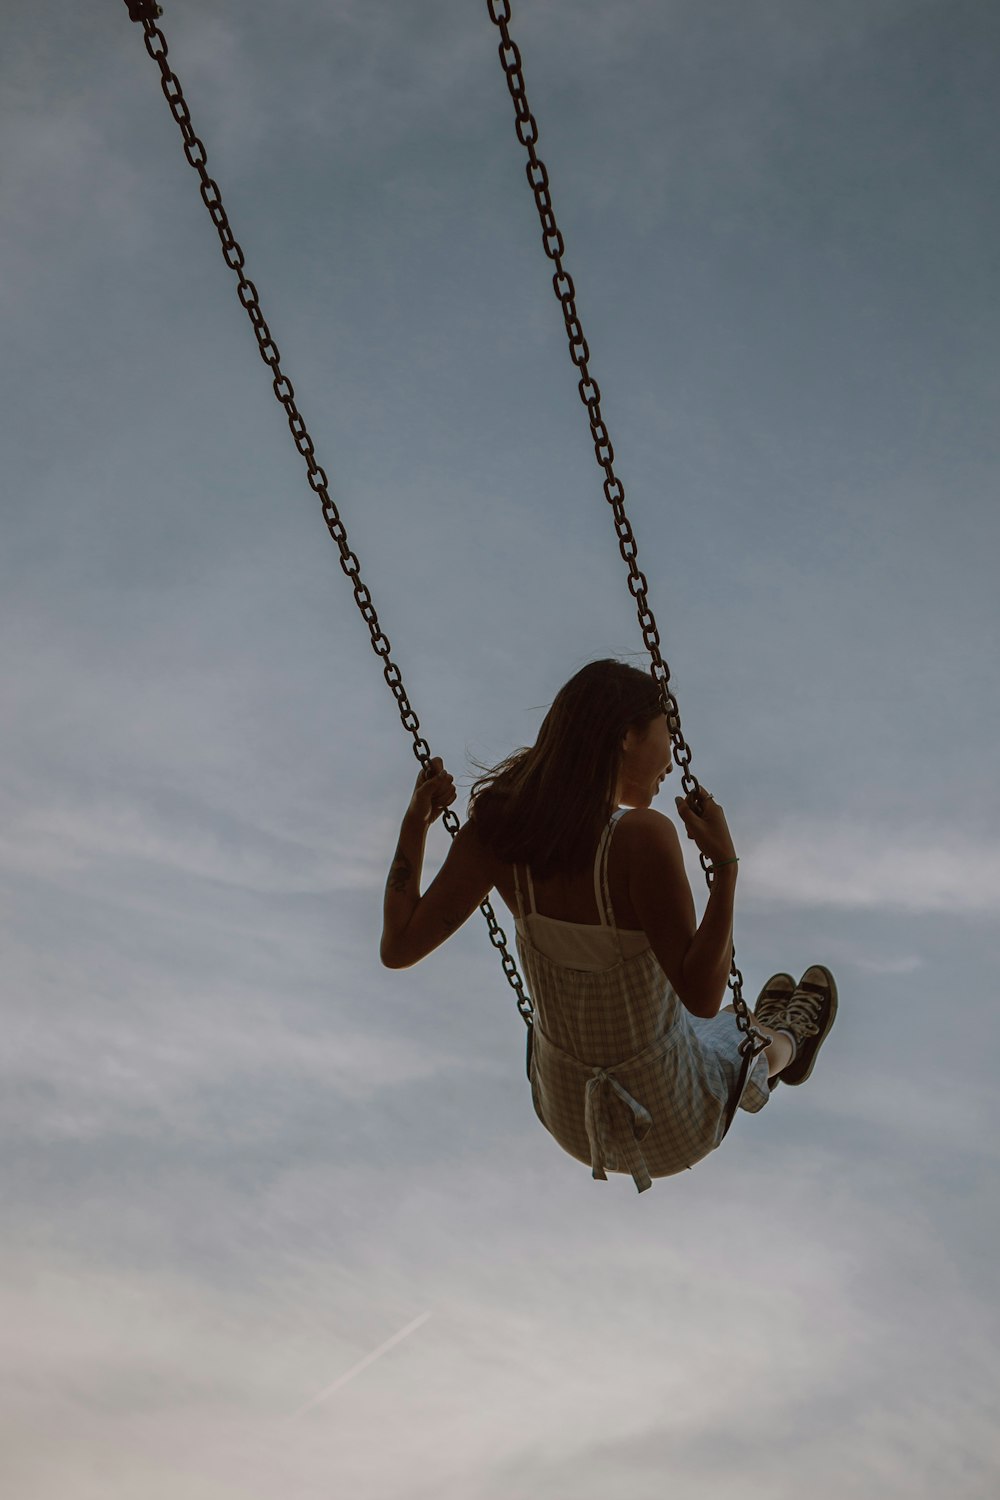 woman in white dress sitting on swing under cloudy sky during daytime